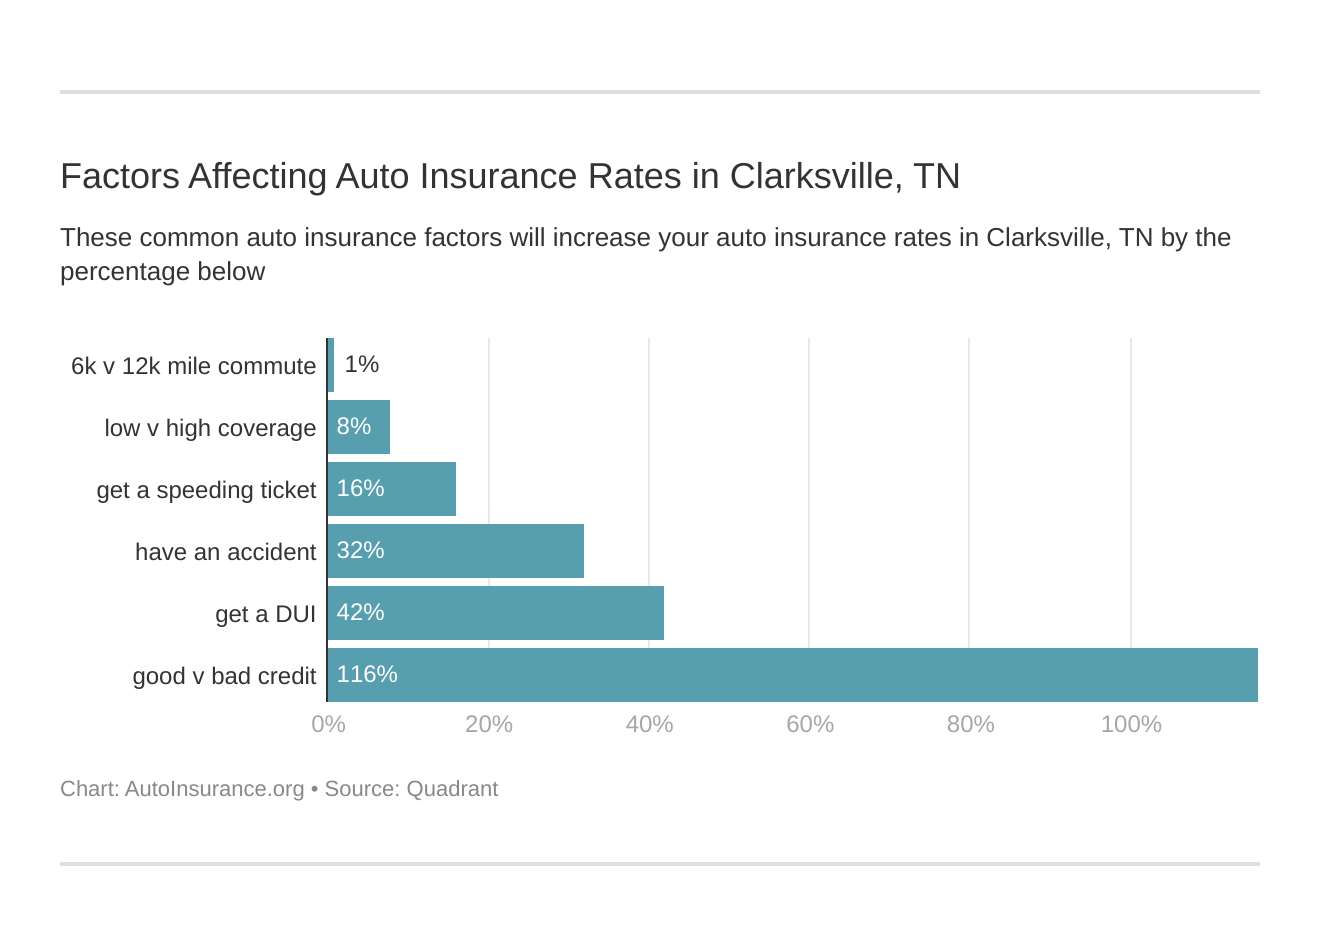 Factors Affecting Auto Insurance Rates in Clarksville, TN